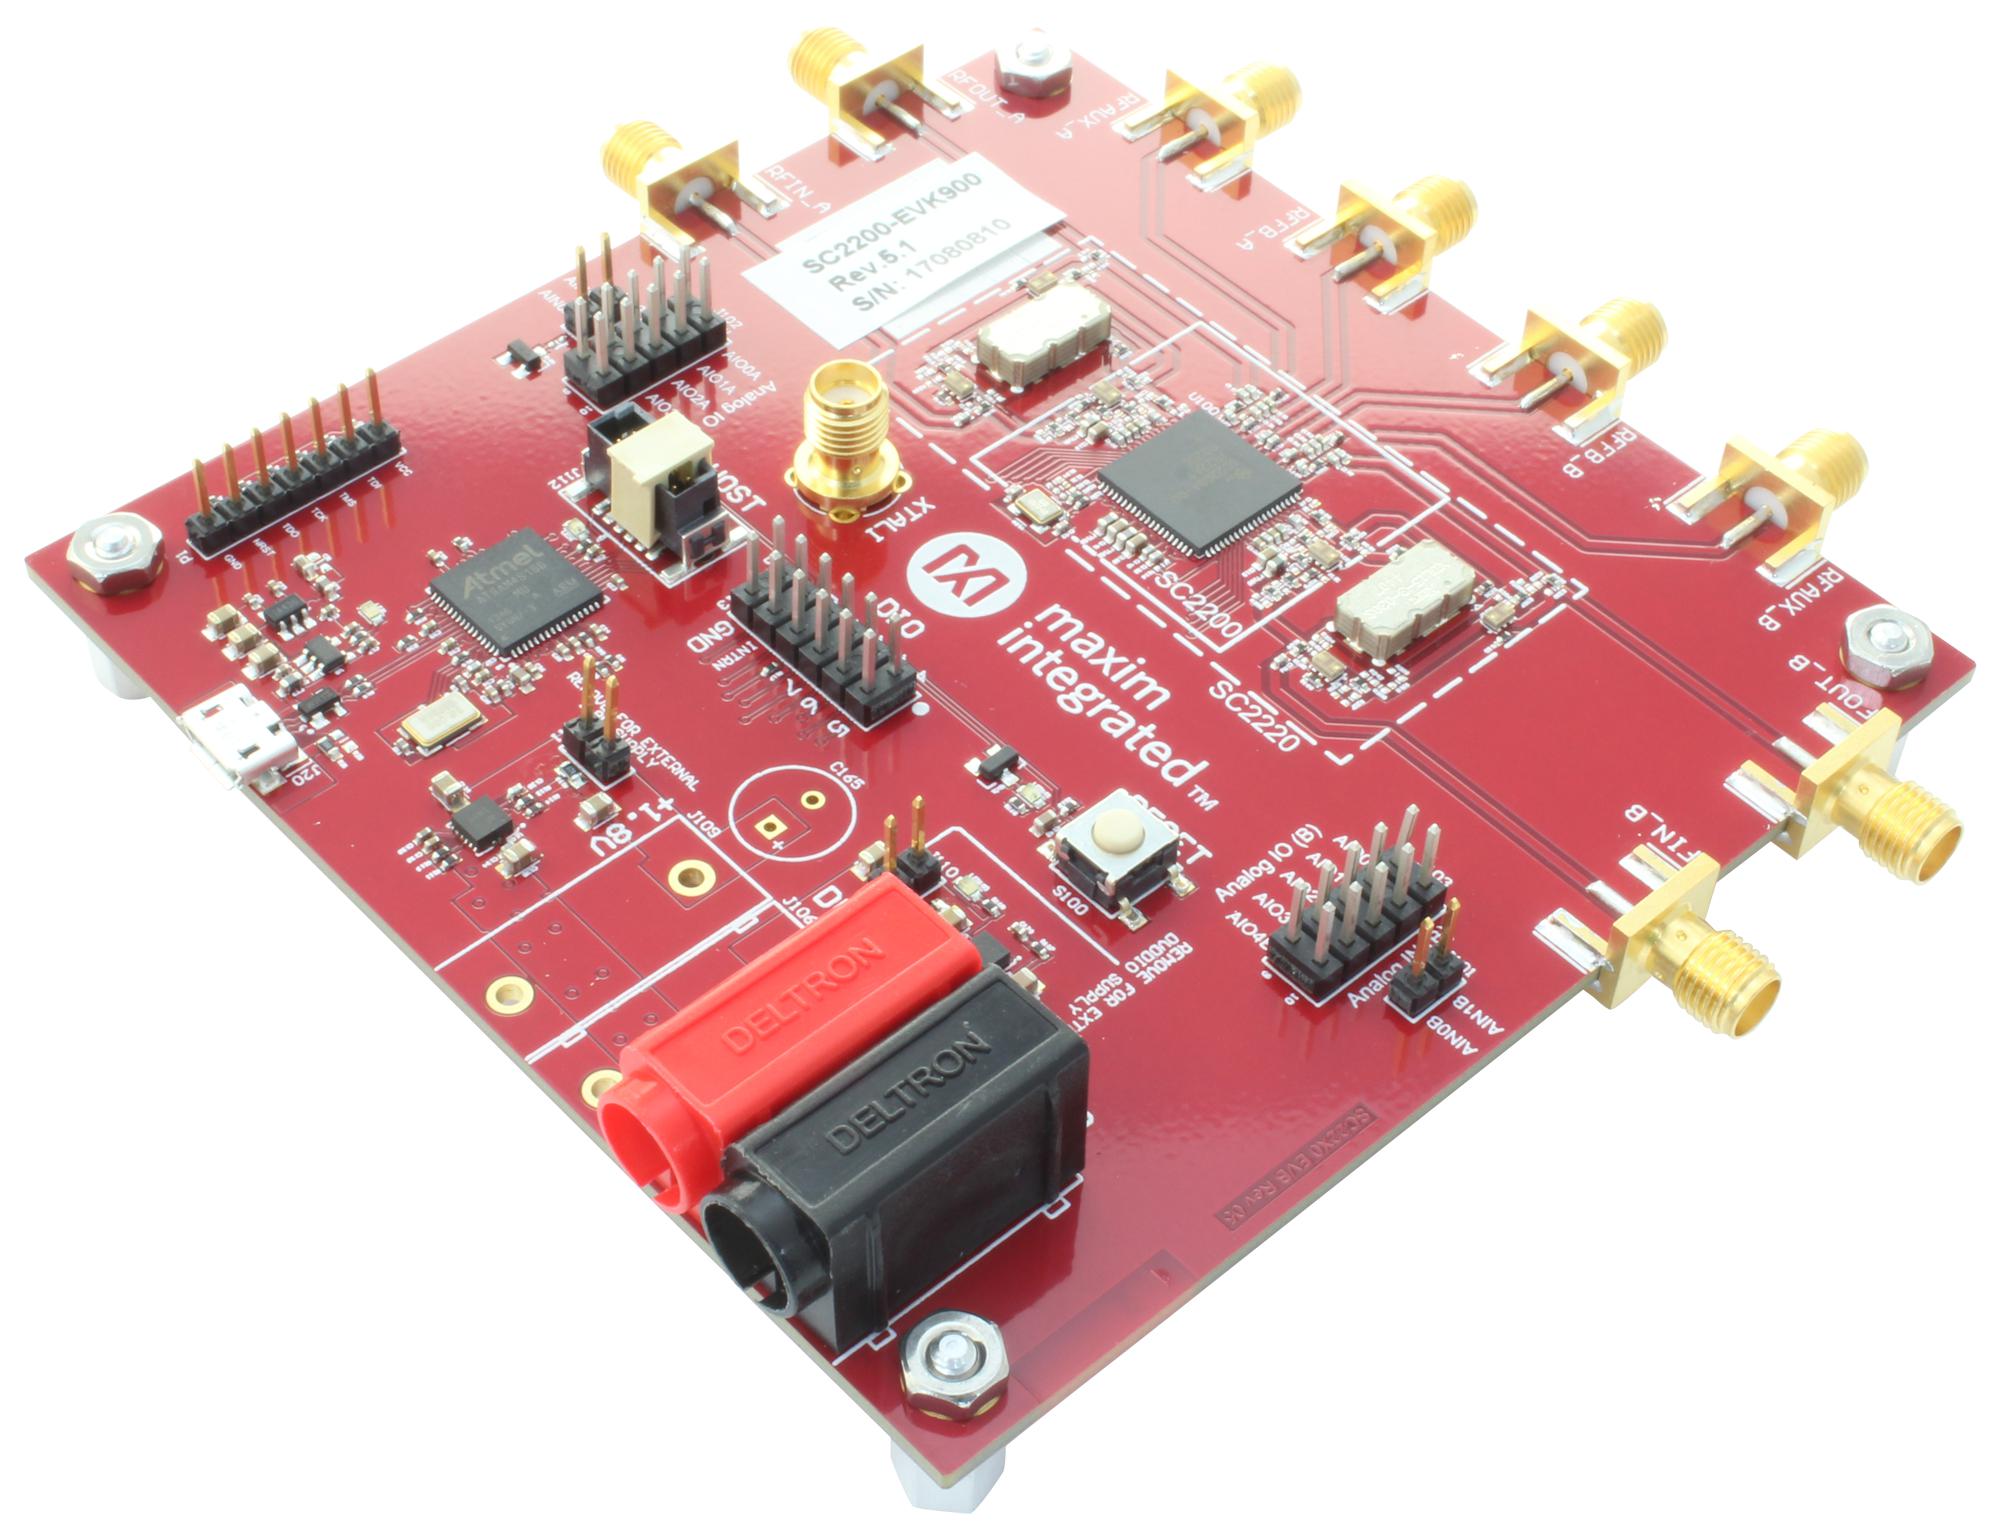 SC2200-EVK900 EVAL BOARD, 698-960MHZ 2 PATH LINEARIZER MAXIM INTEGRATED / ANALOG DEVICES